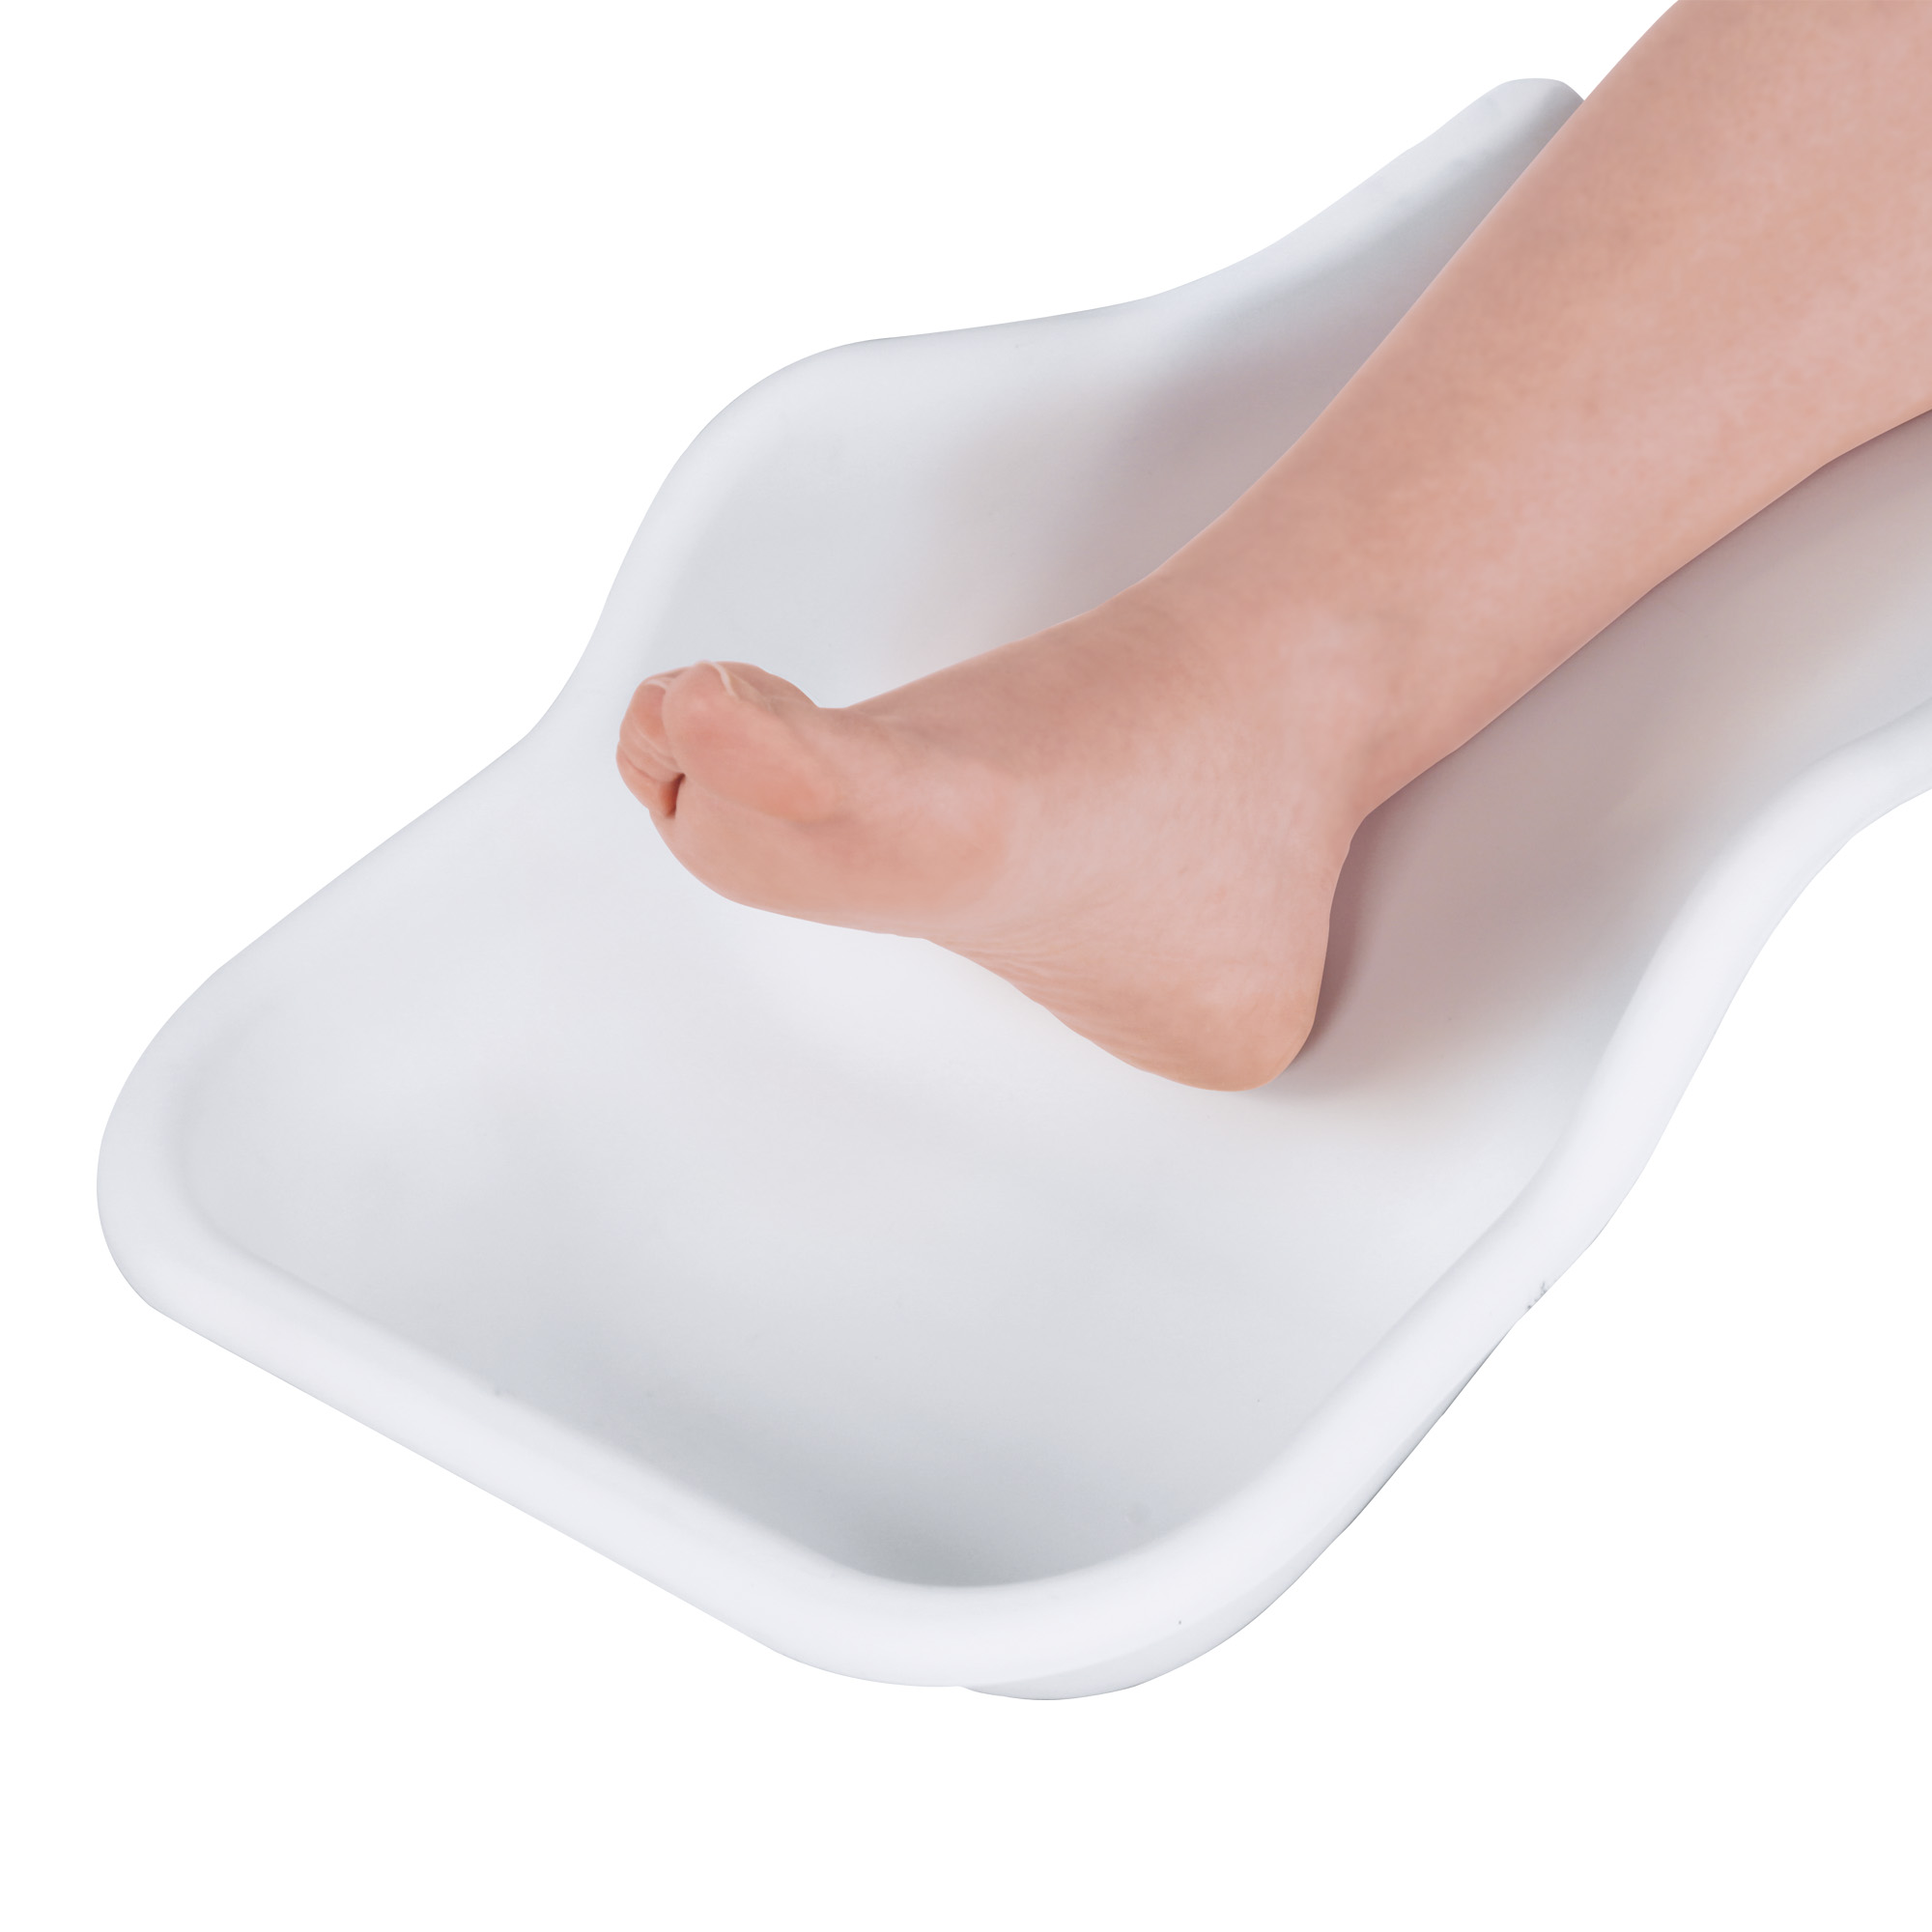 Flexible tray for the collection of pedicure residues on the foot white